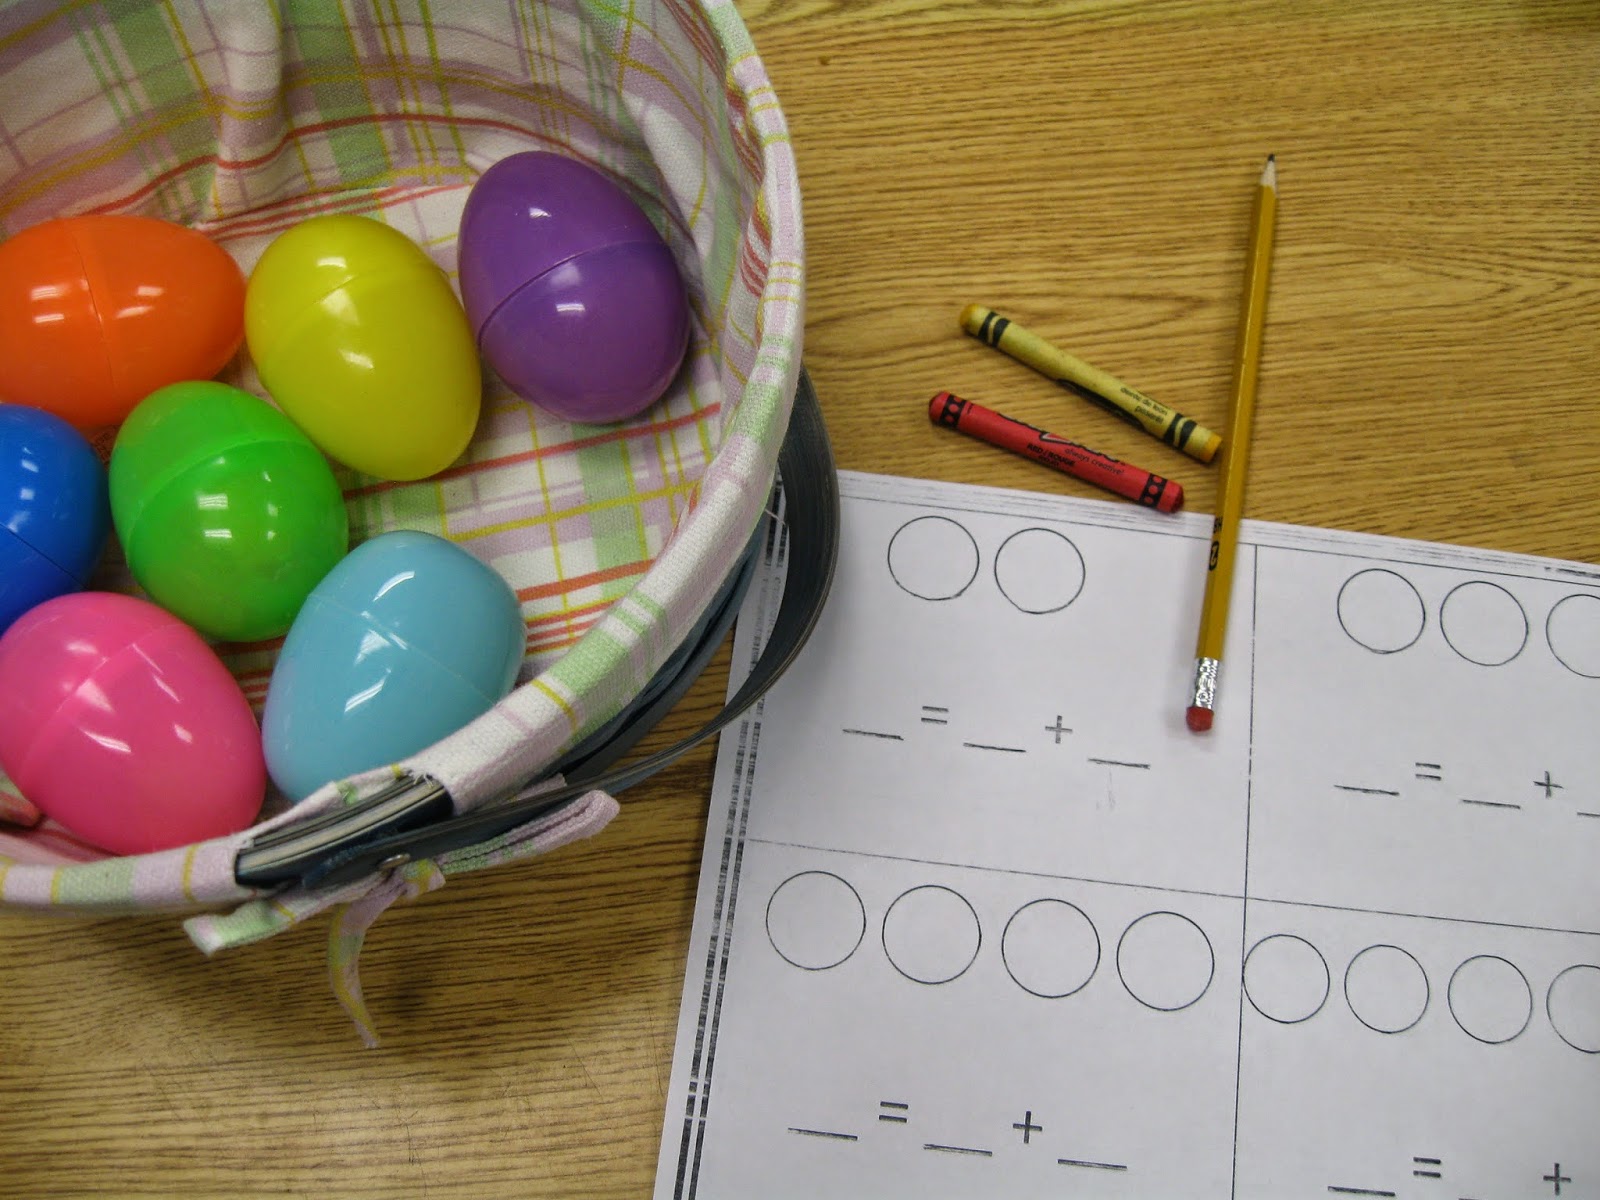 Crayons & Cuties In Kindergarten: An 'EGG'-citing Way To Decompose Numbers!